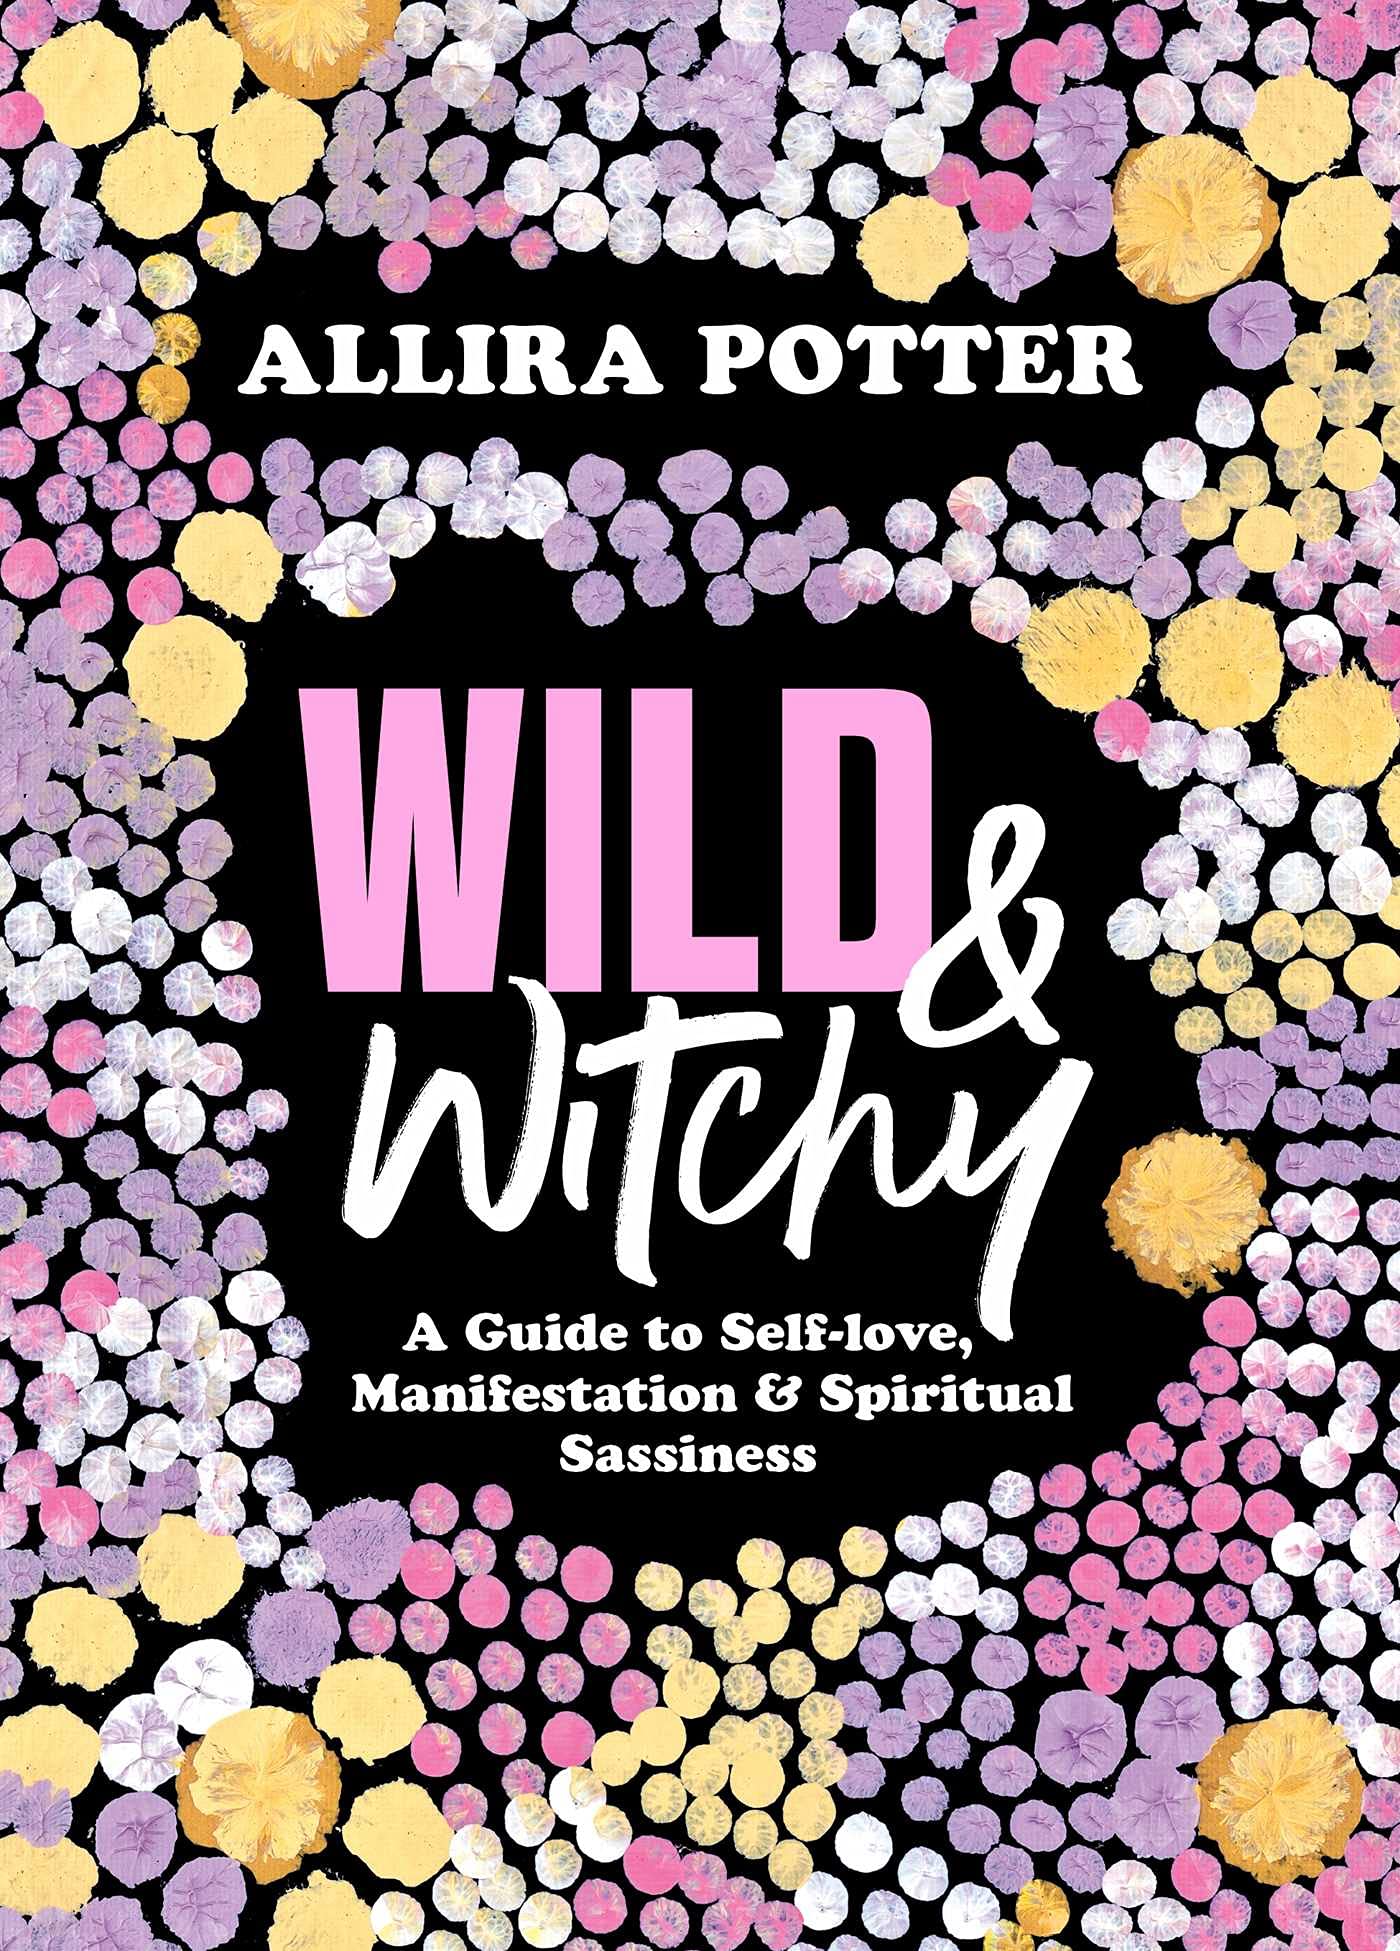 Wild & Witchy Guide to Self-love, Manifestation & Spiritual Sassiness